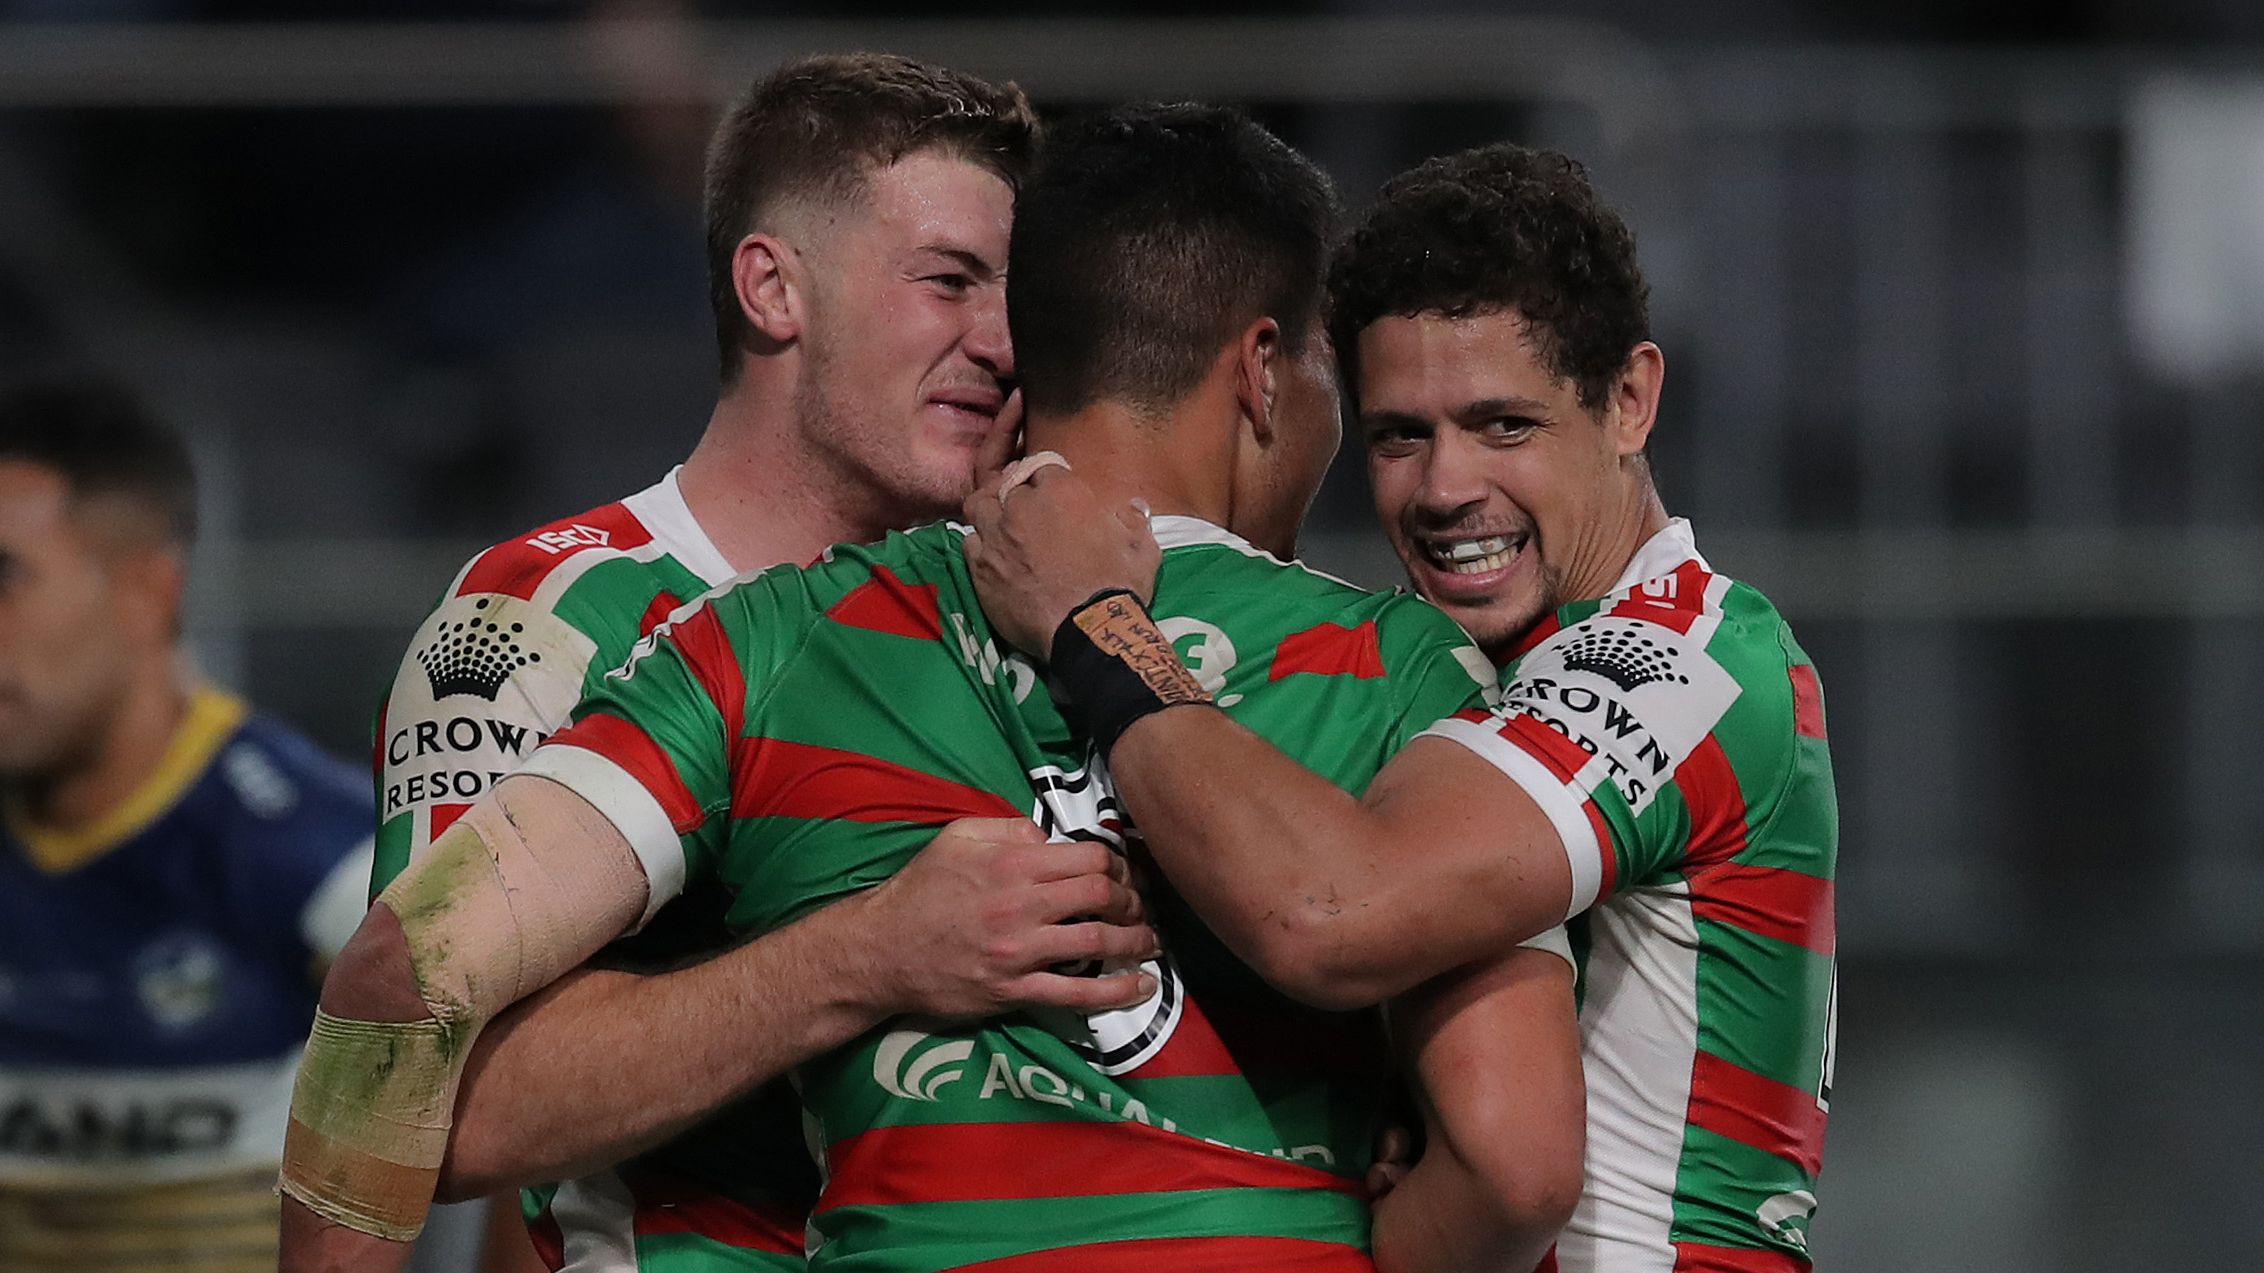 Huge injury blow for Rabbitohs with Campbell Graham ruled out of preliminary final